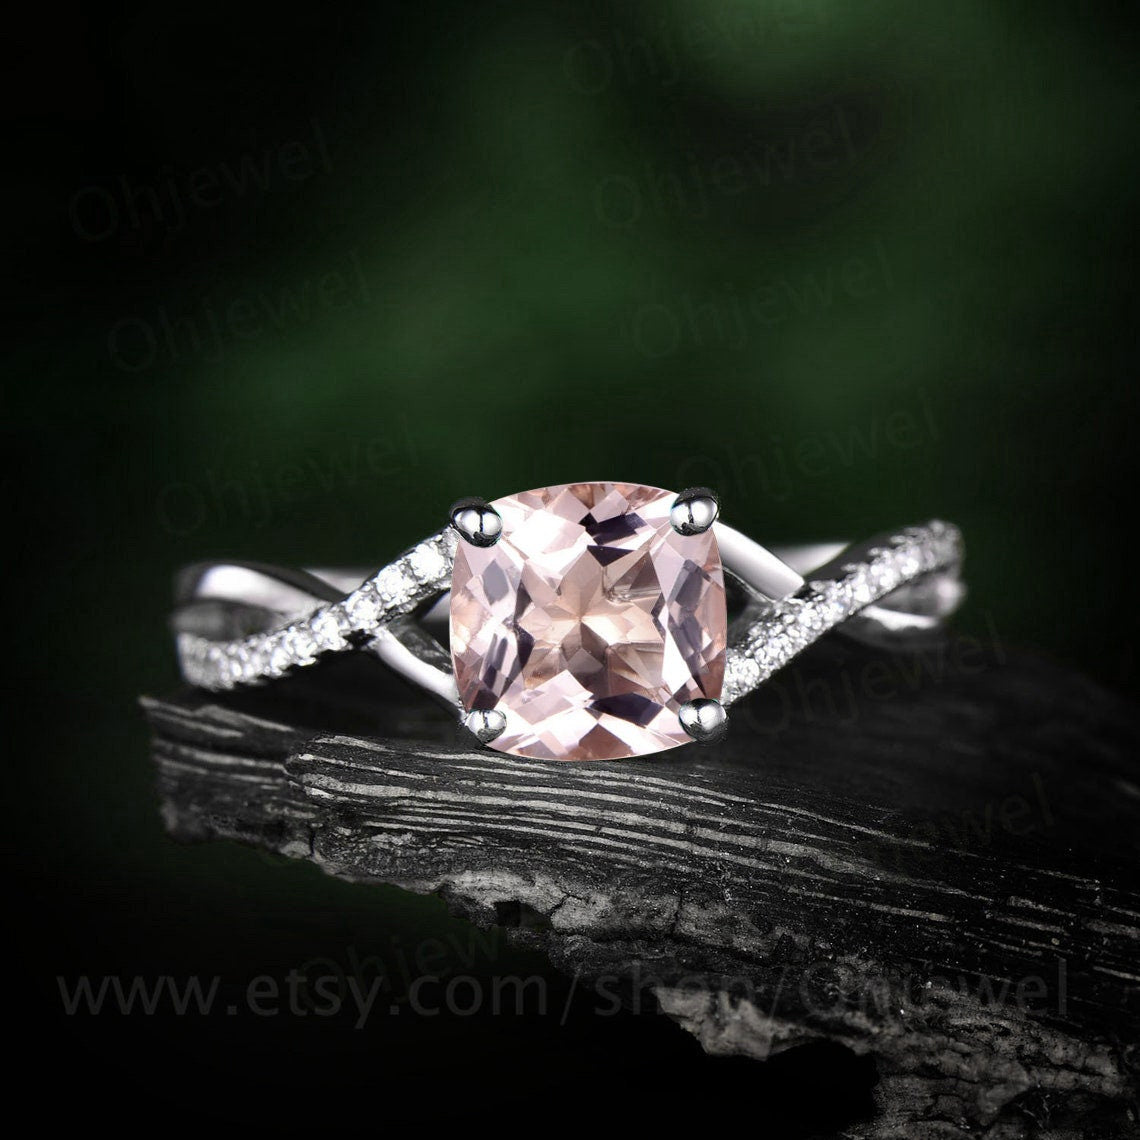 Louily Elegant Rose Gold Pear Cut Pink Sapphire Engagement Ring In Sterling  Silver | louilyjewelry